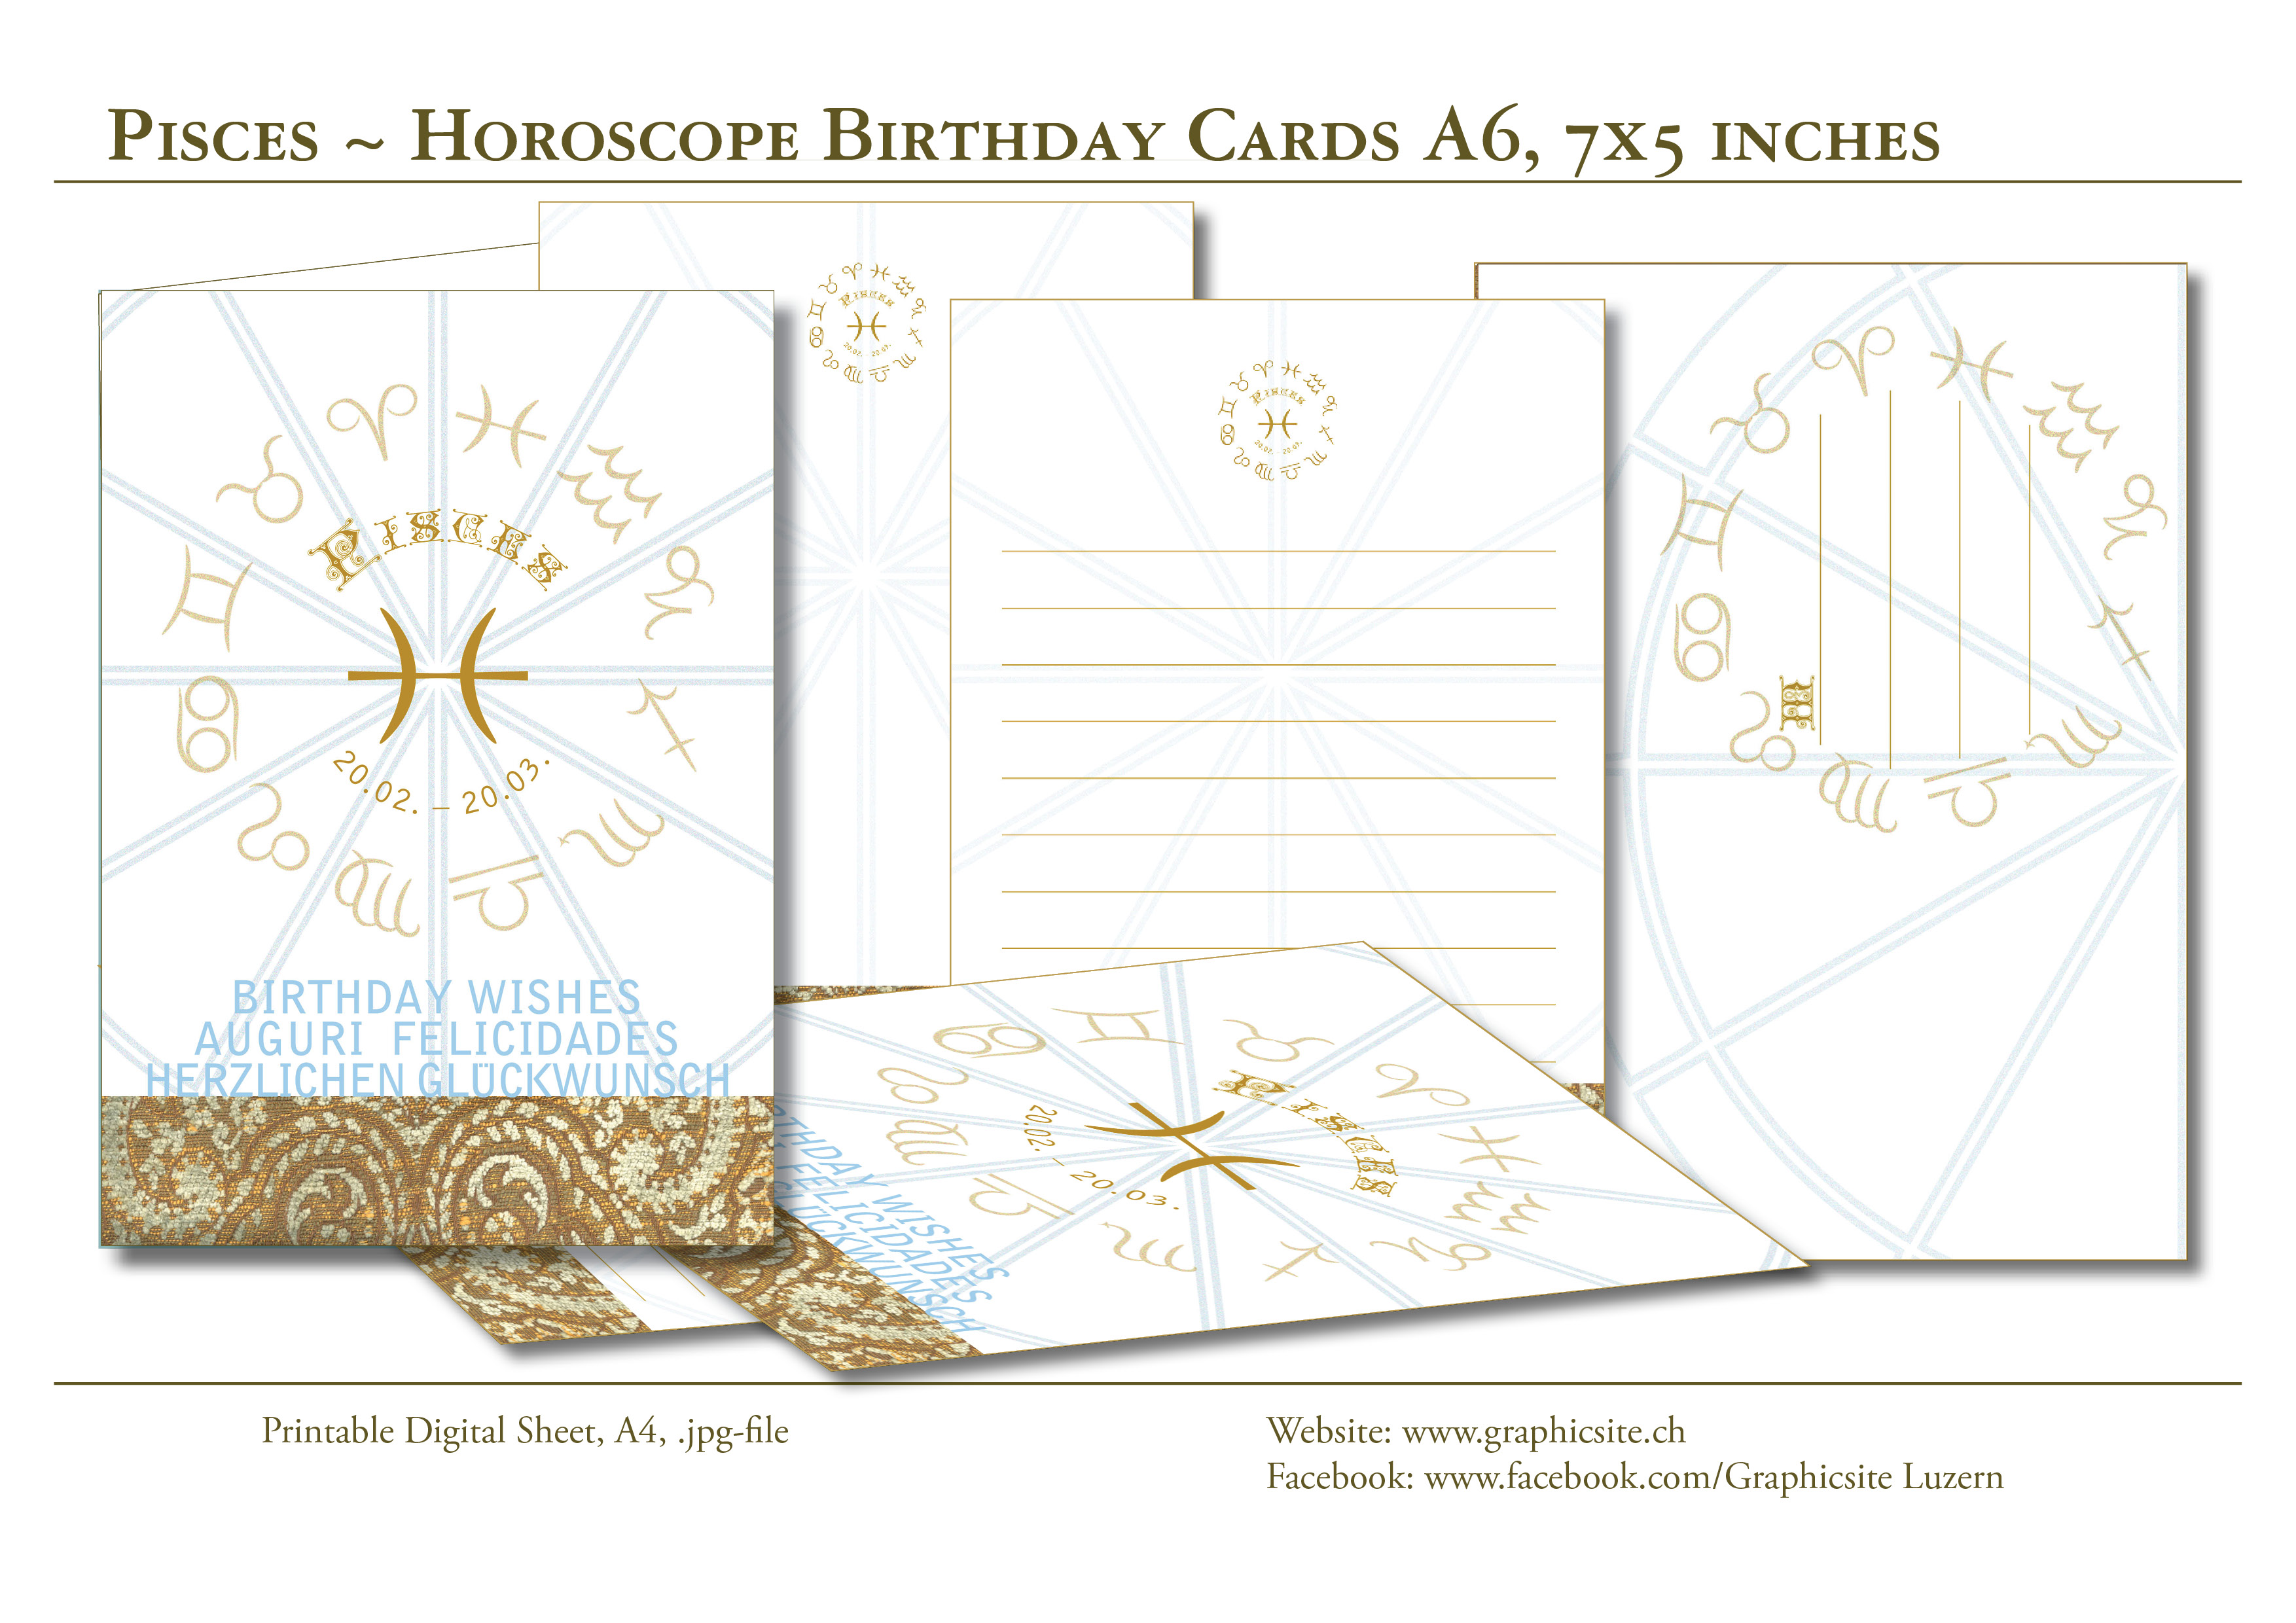 Printable Digital Sheets - Birthday Card Collection - Horoscope - Zodiac - Pisces A6 - GraphicDesign, Luzern